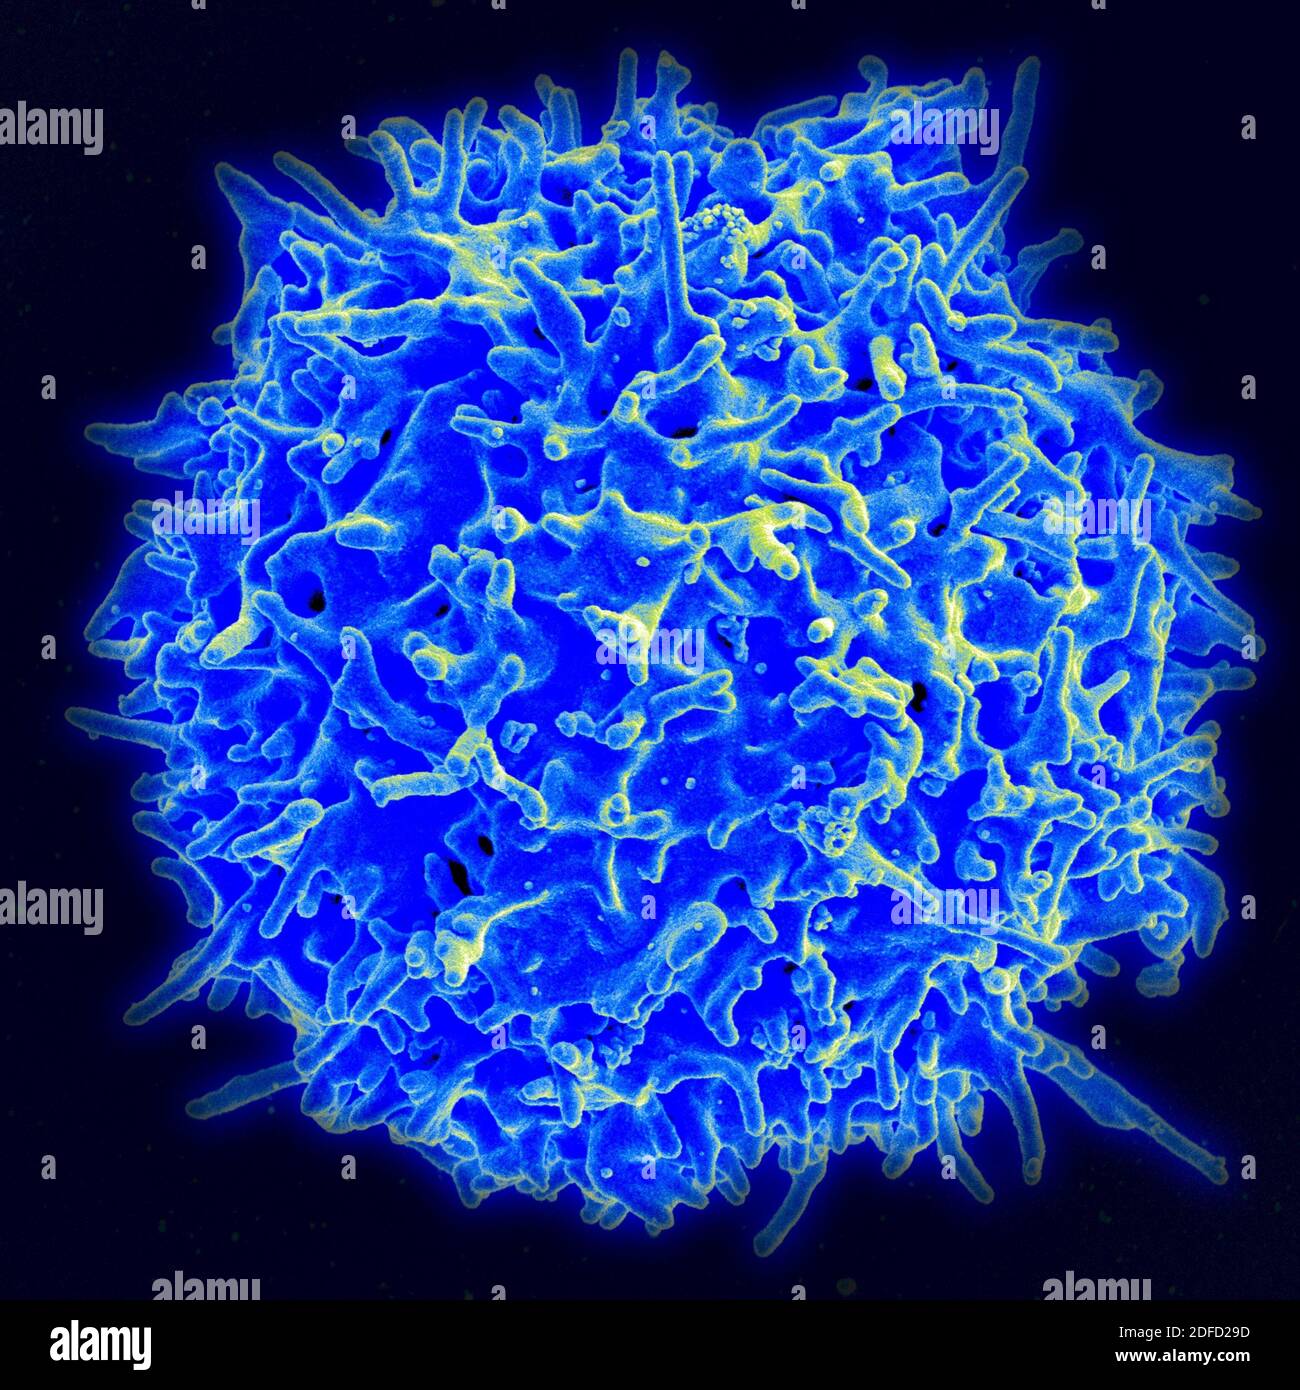 Scanning electron micrograph of a human T lymphocyte (also called a T cell) from the immune system of a healthy donor. Credit: NIAID. Stock Photo